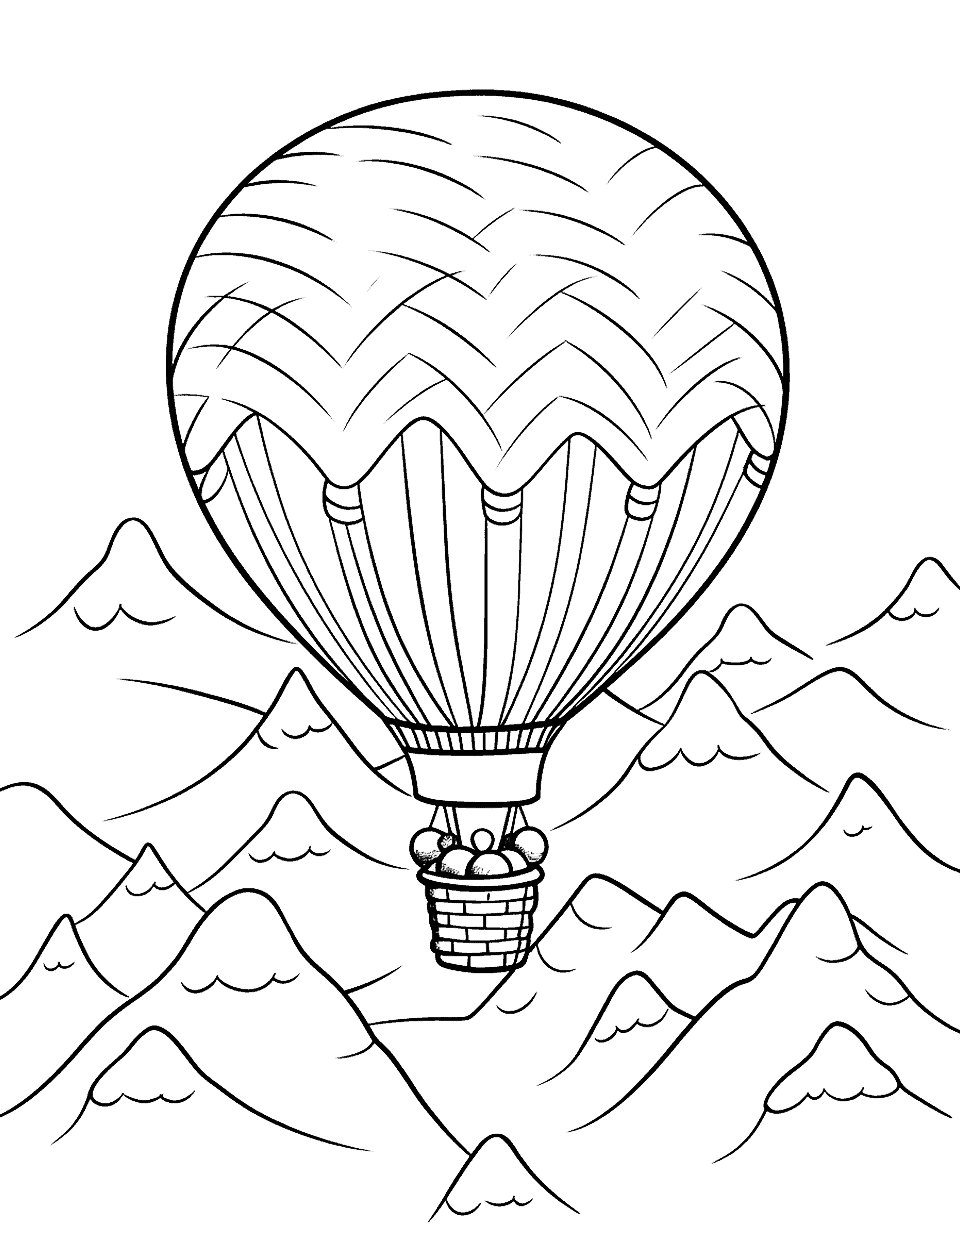 Hot Air Balloon Adventure Christmas Coloring Page - A hot air balloon ride over a snow-covered landscape.